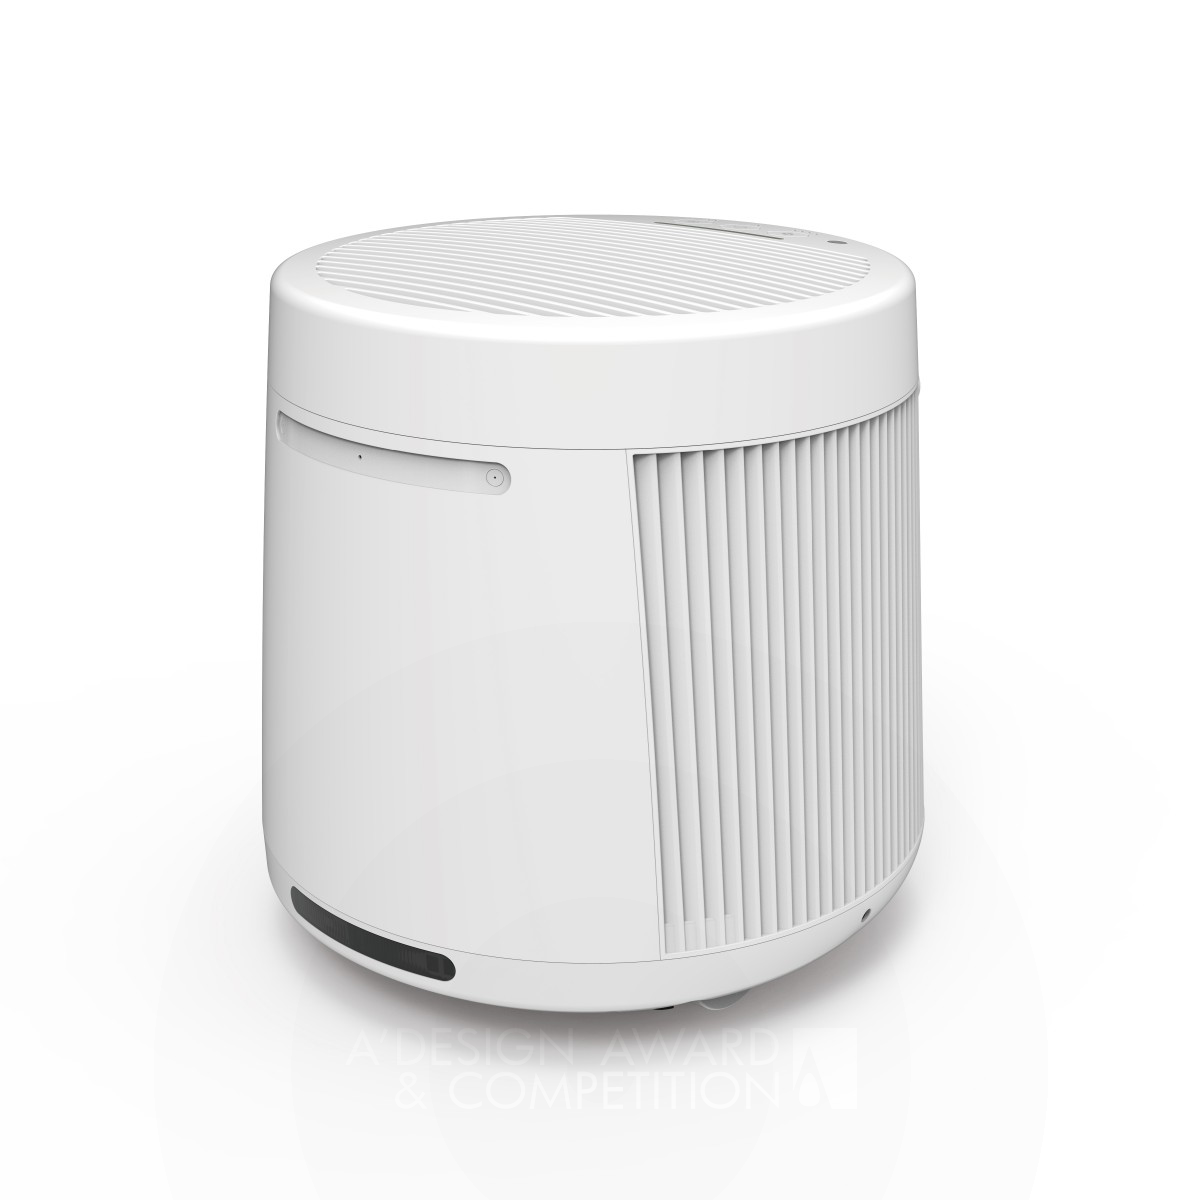 Brisk Mini: Redefining Air Purification with Mobility and Intelligence